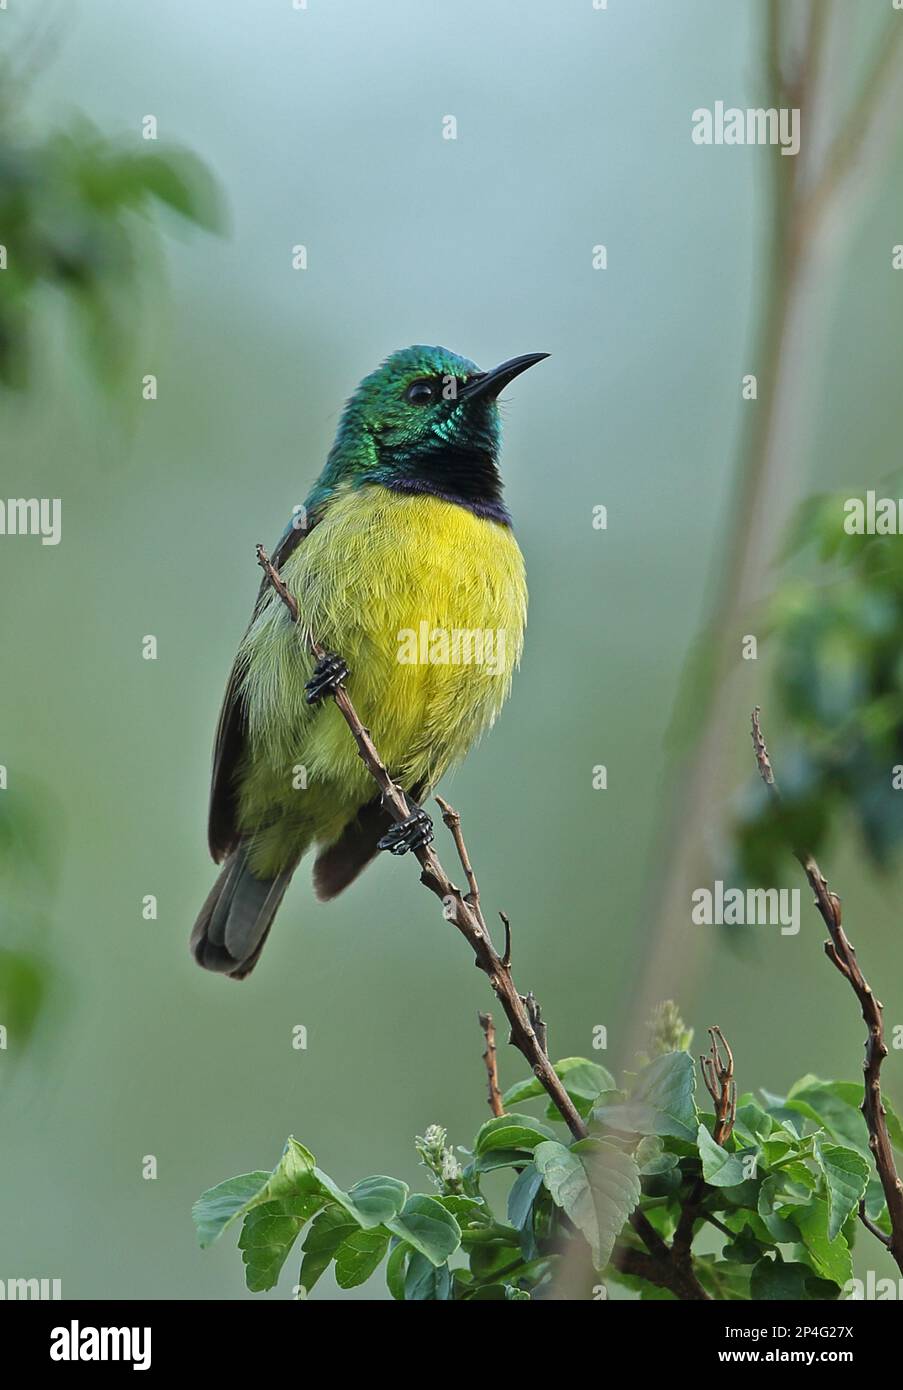 Collared Sunbird (Hedydipna collaris zuluensis), adult male, sitting on a branch, Kruger N. P. Great Limpopo Transfrontier Park, South Africa Stock Photo